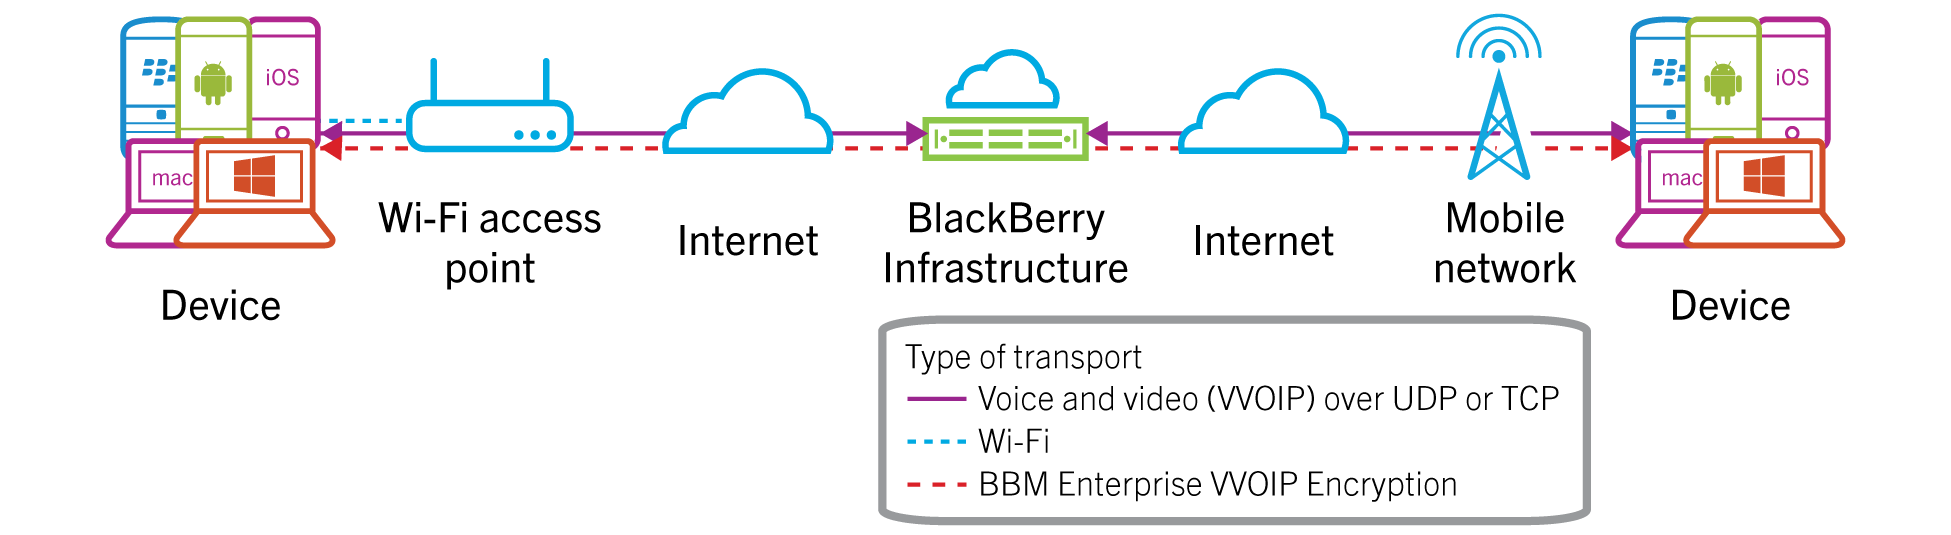 Architectural diagram showing how BBM Enterprise                        voice and video protects messages between a device on a Wi-Fi network and a device on a Wi-Fi network through the BlackBerry Infrastructure during data transfer